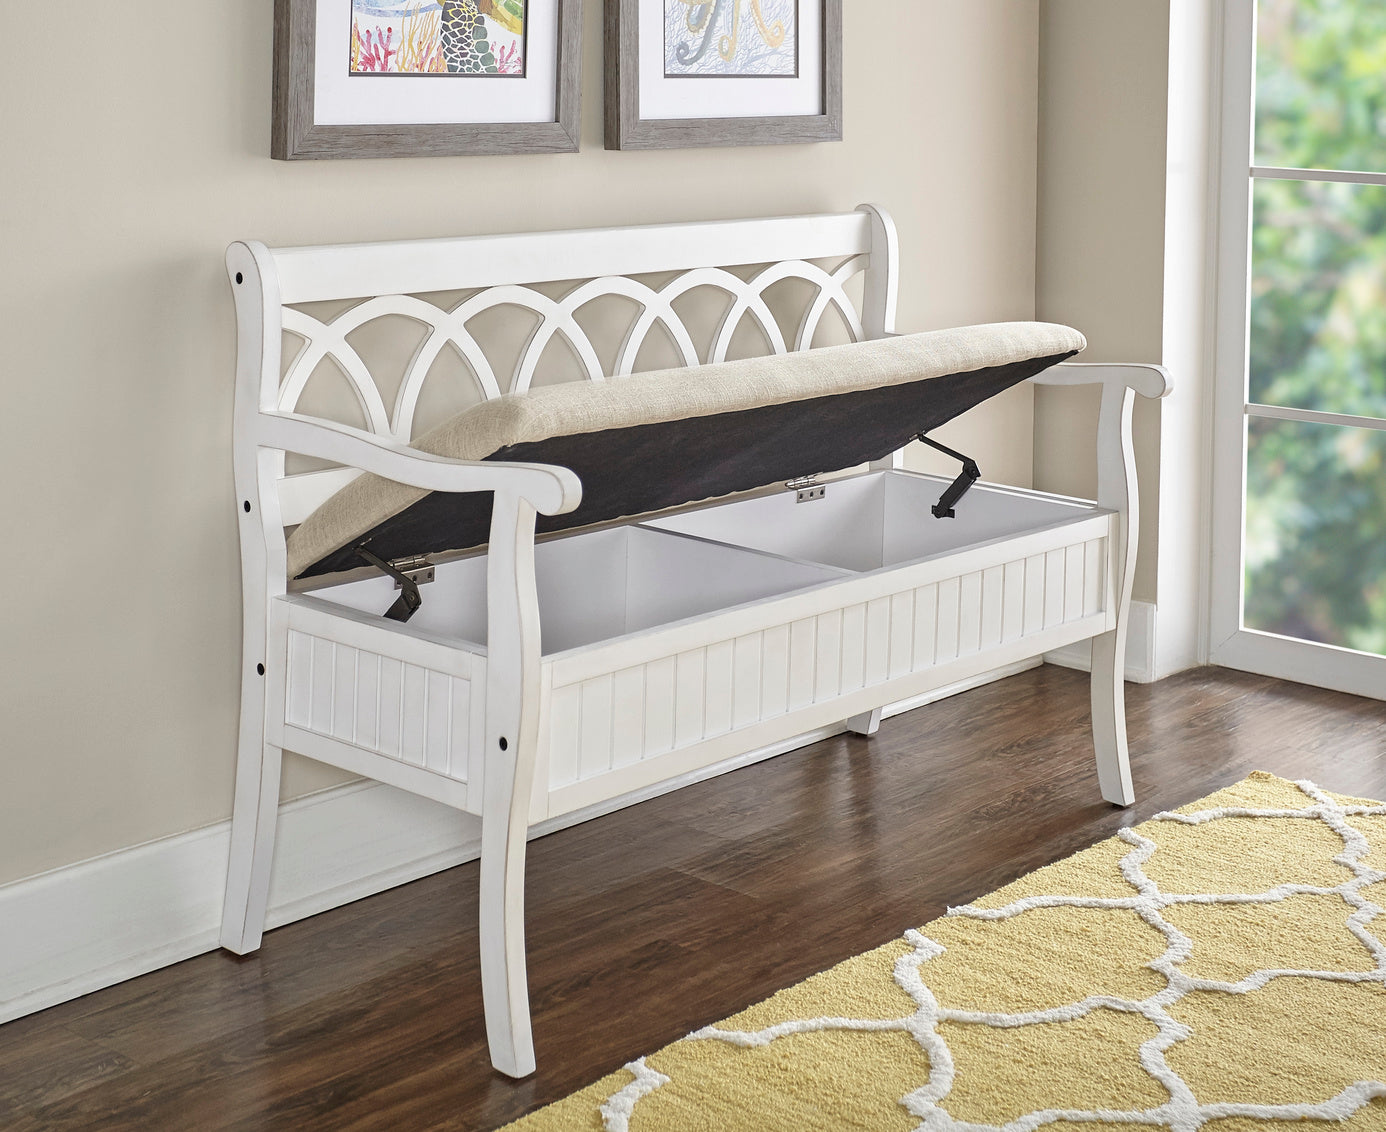 WEEKLY or MONTHLY. Home Wood Storage Bench in White